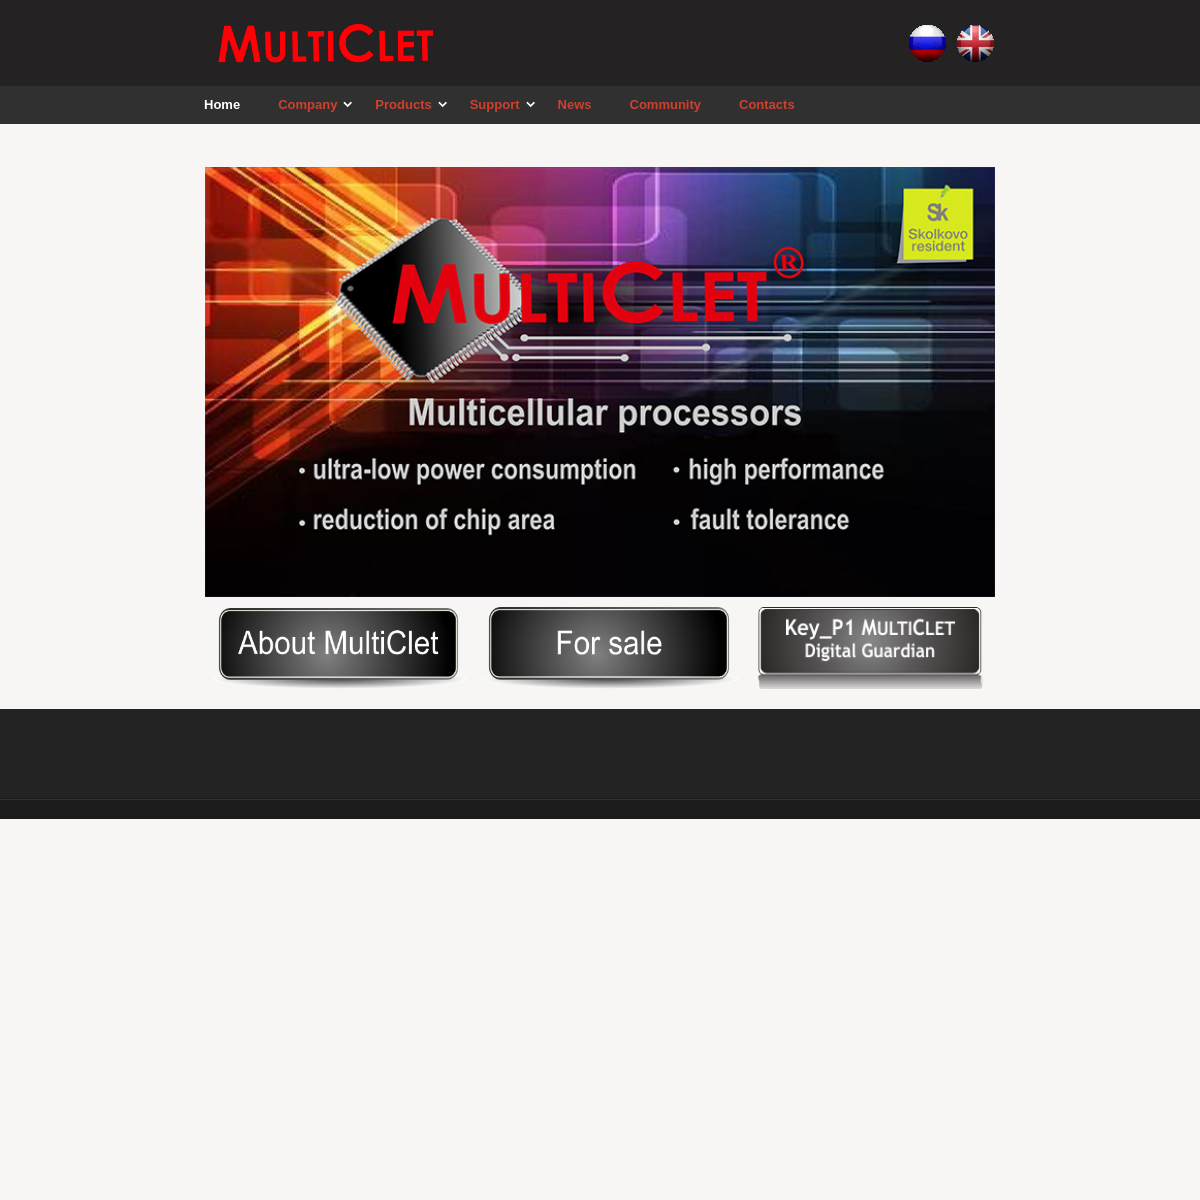 A complete backup of multiclet.com